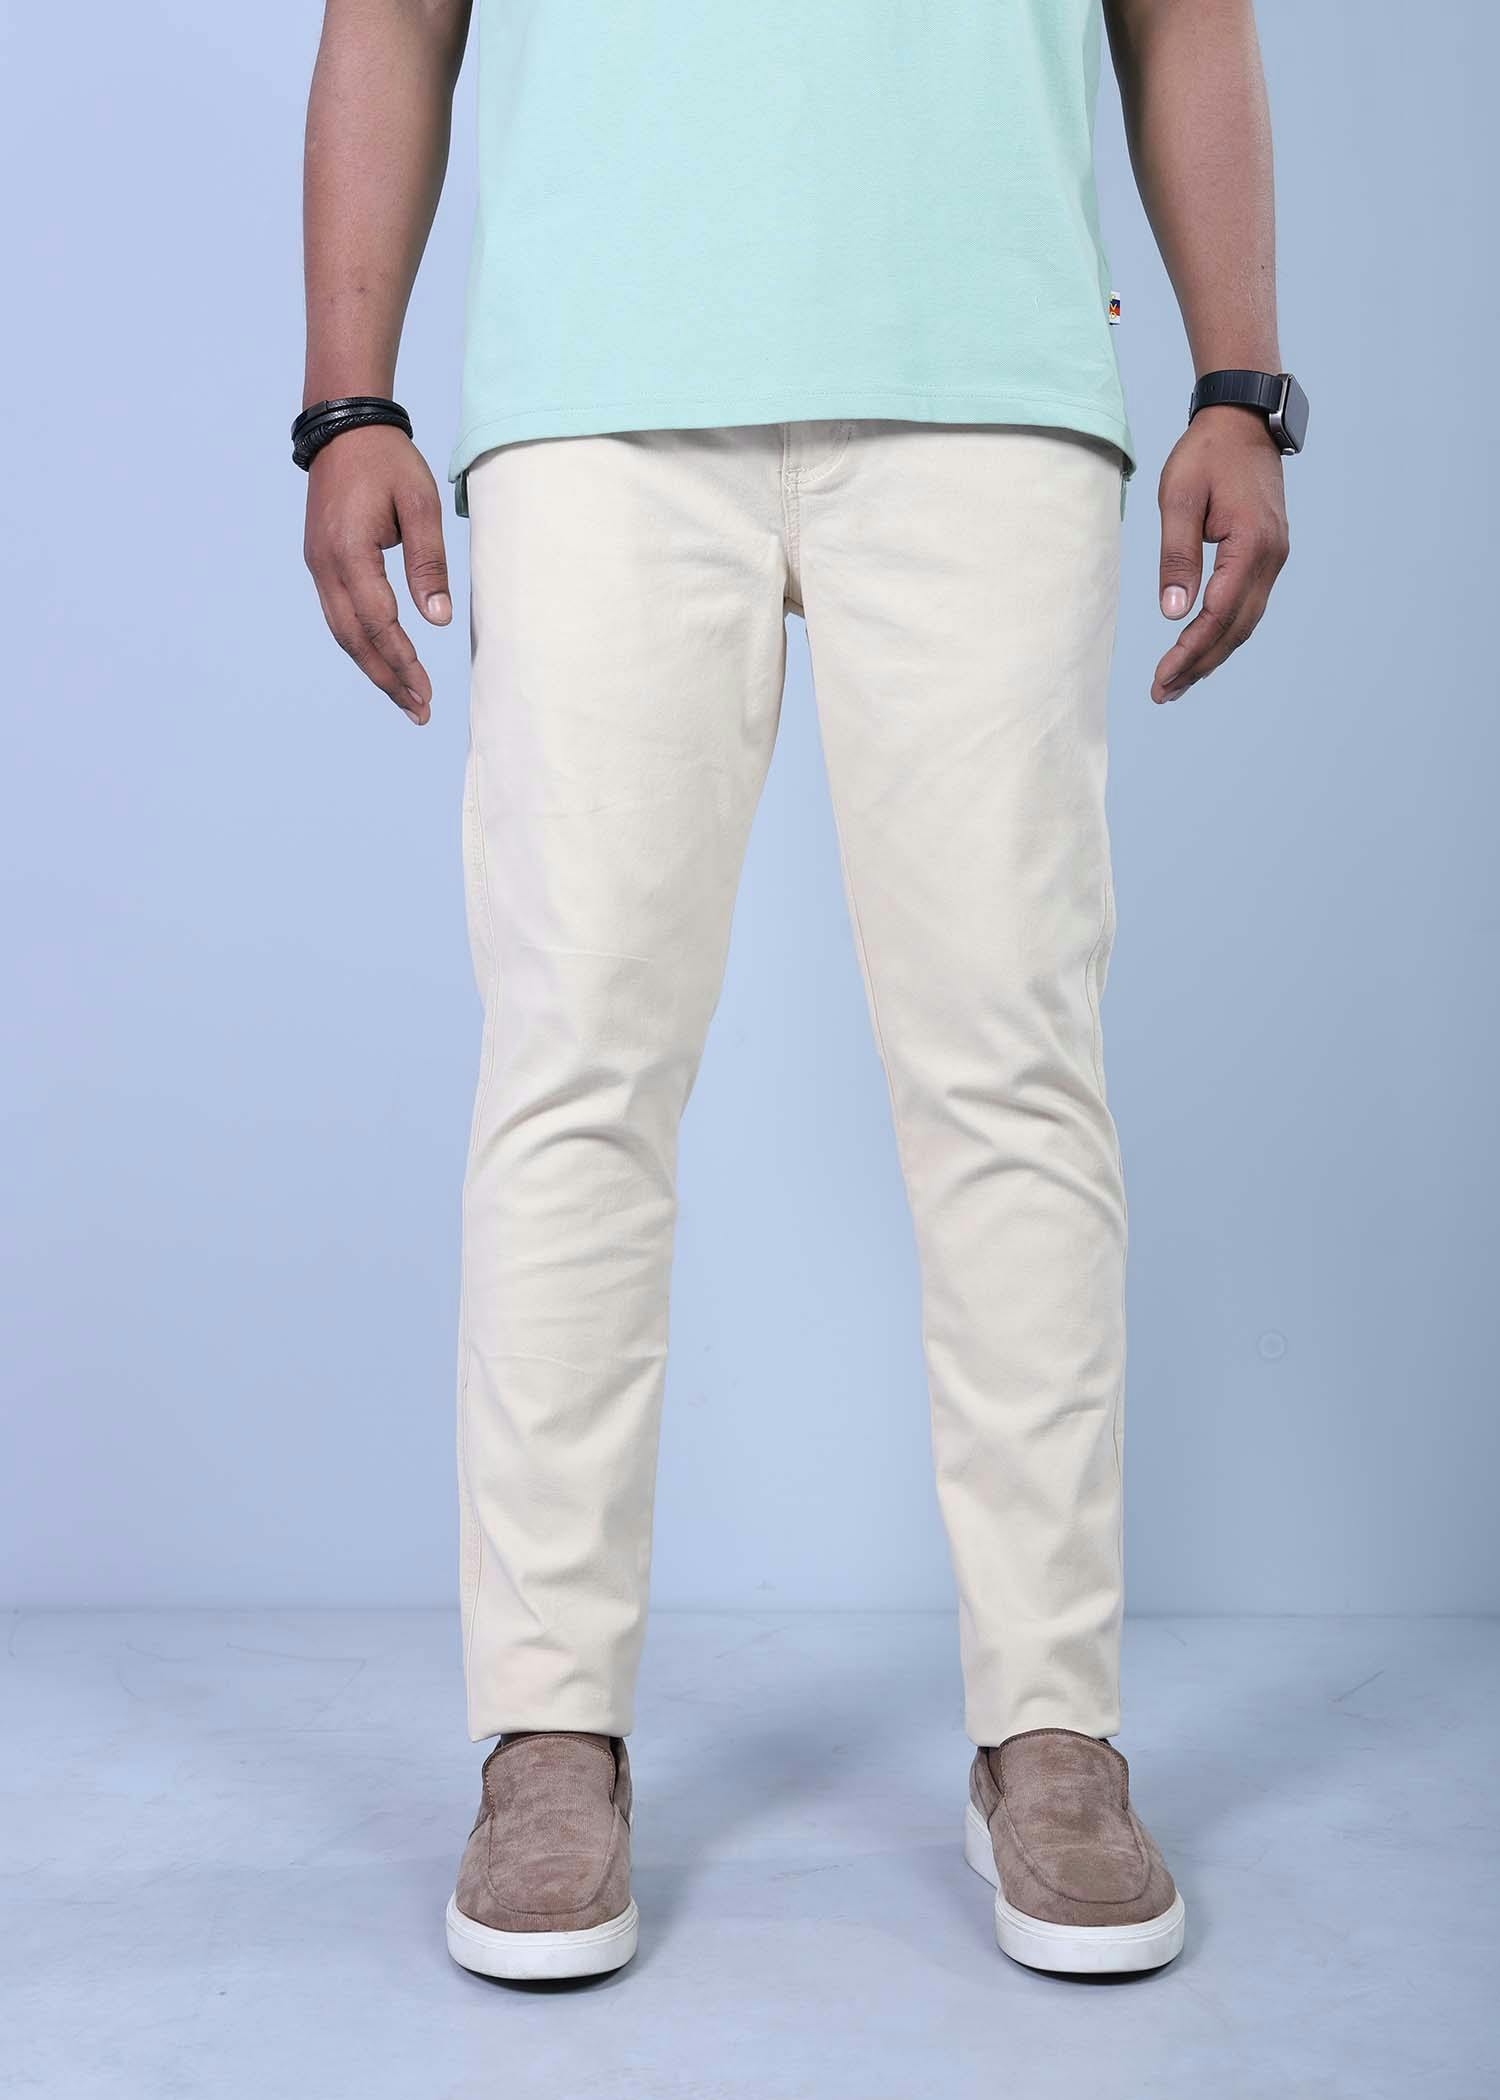 parla i chino pant beige color half front view